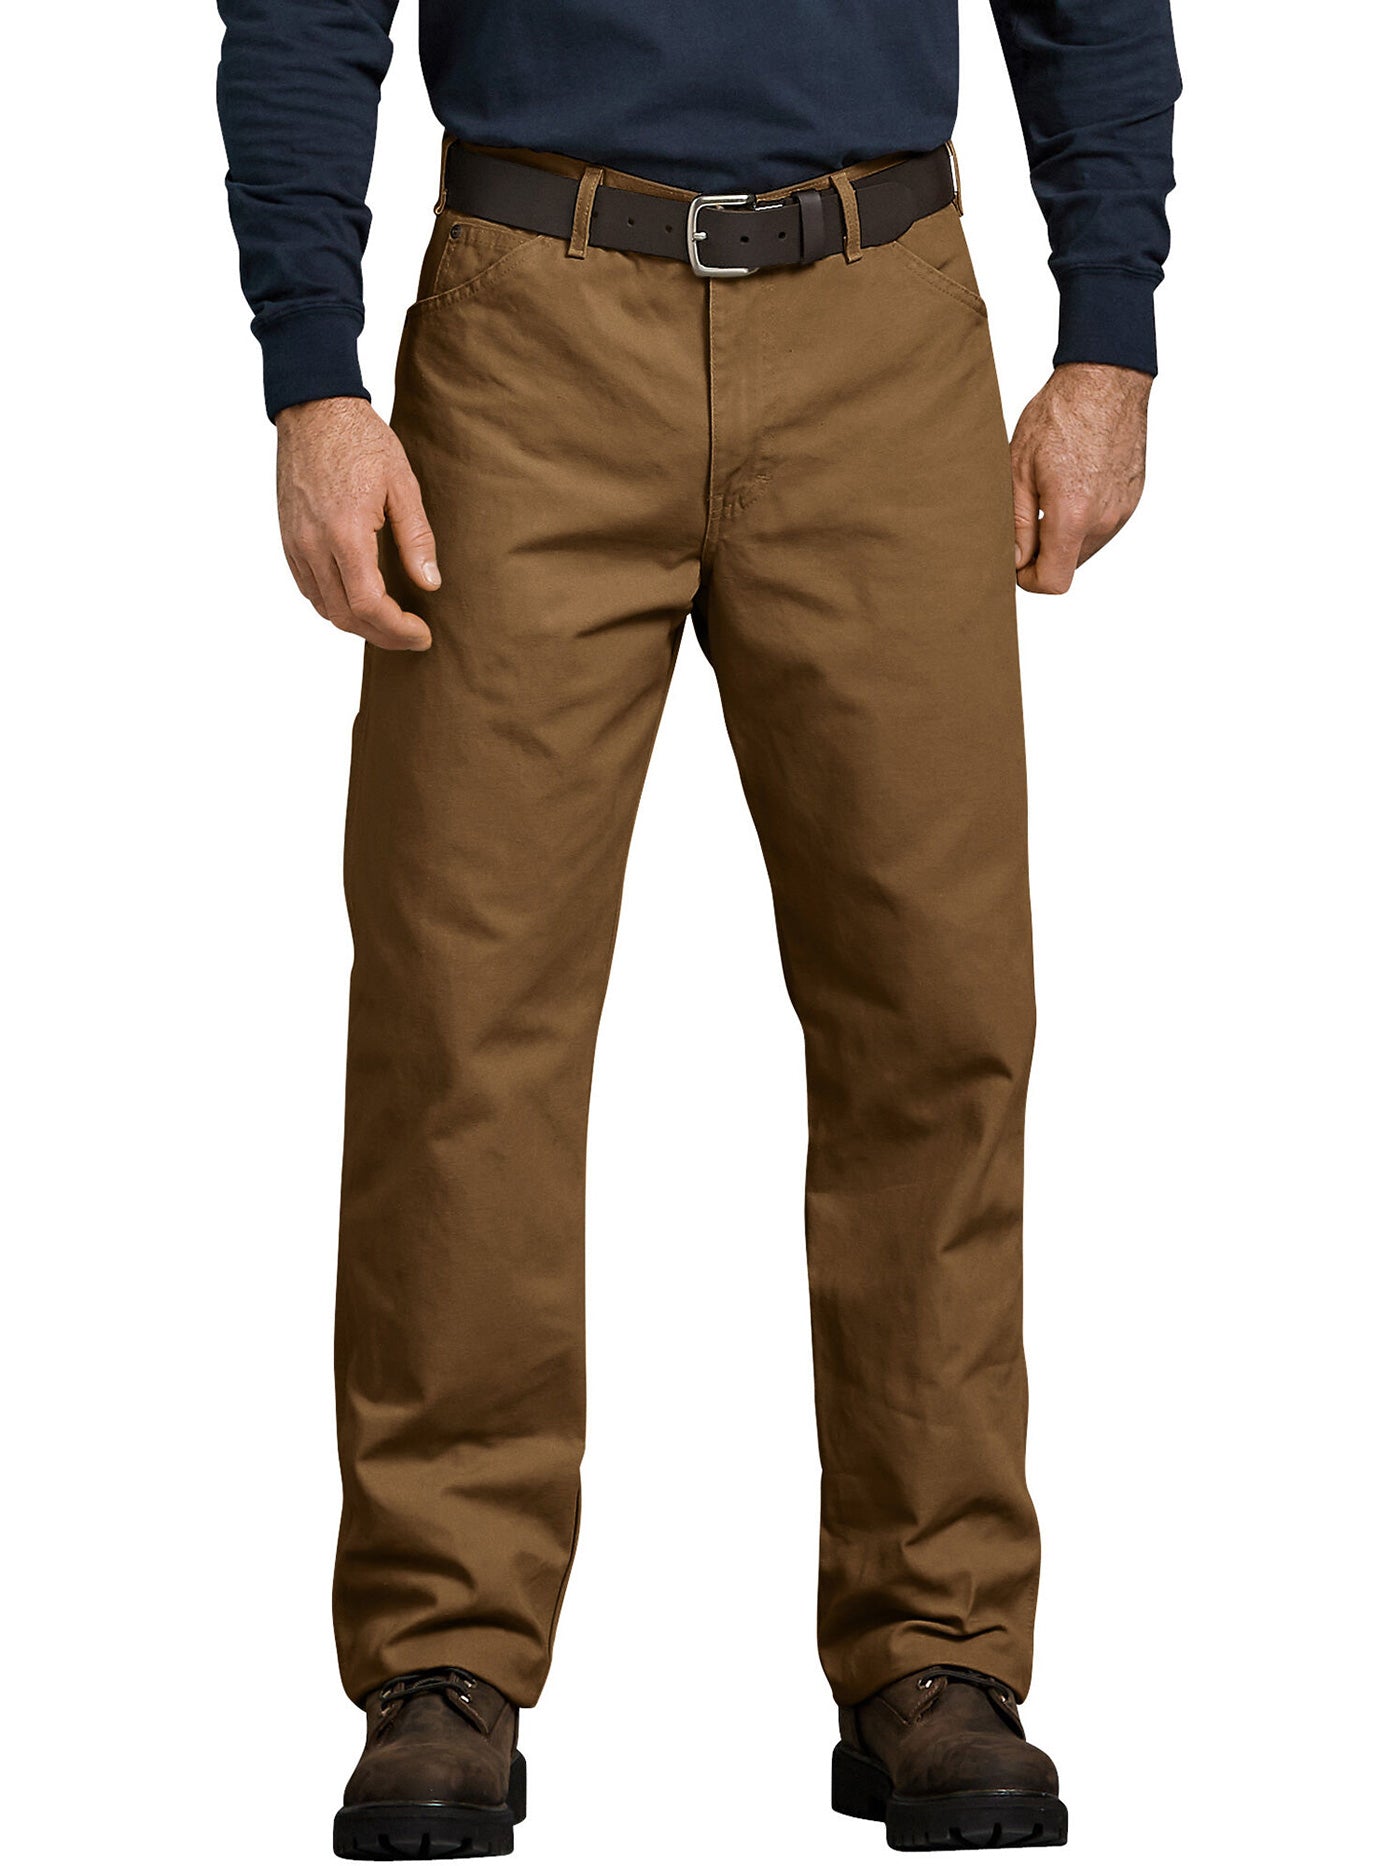 Dickies Carpenter Duck Relaxed Straight Fit Jeans